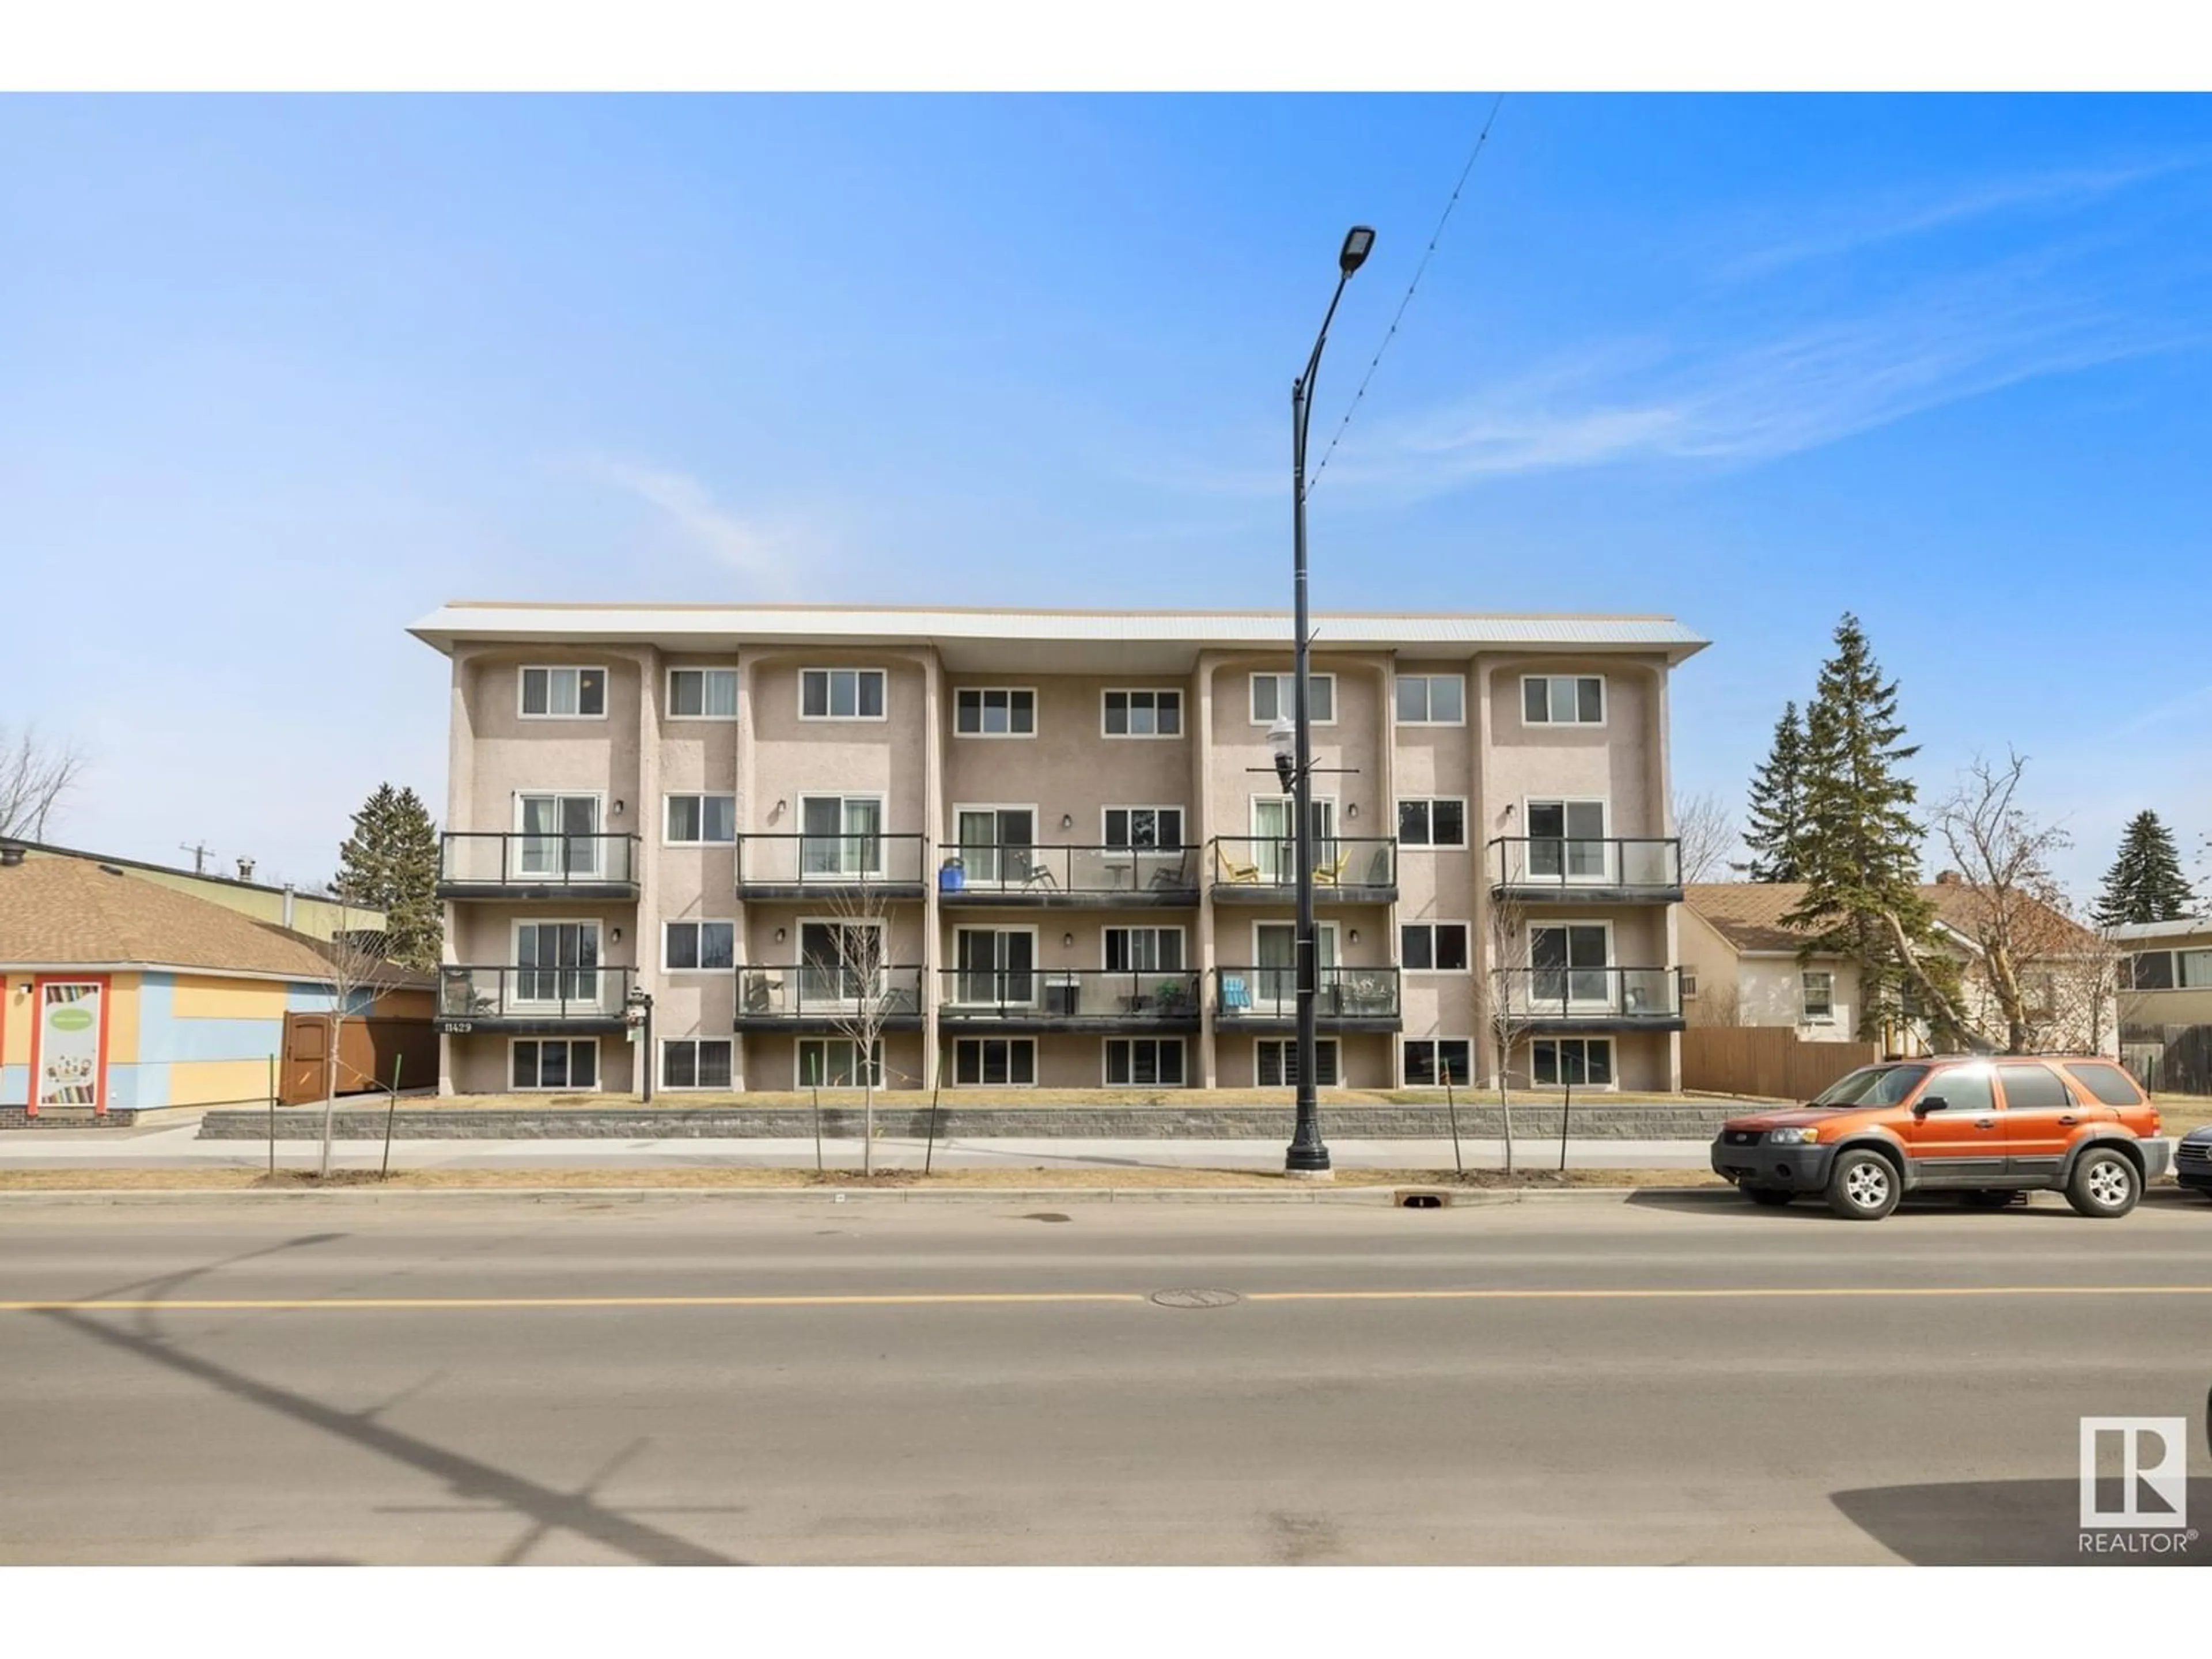 A pic from exterior of the house or condo for #210 11429 124 ST NW, Edmonton Alberta T5M0K4